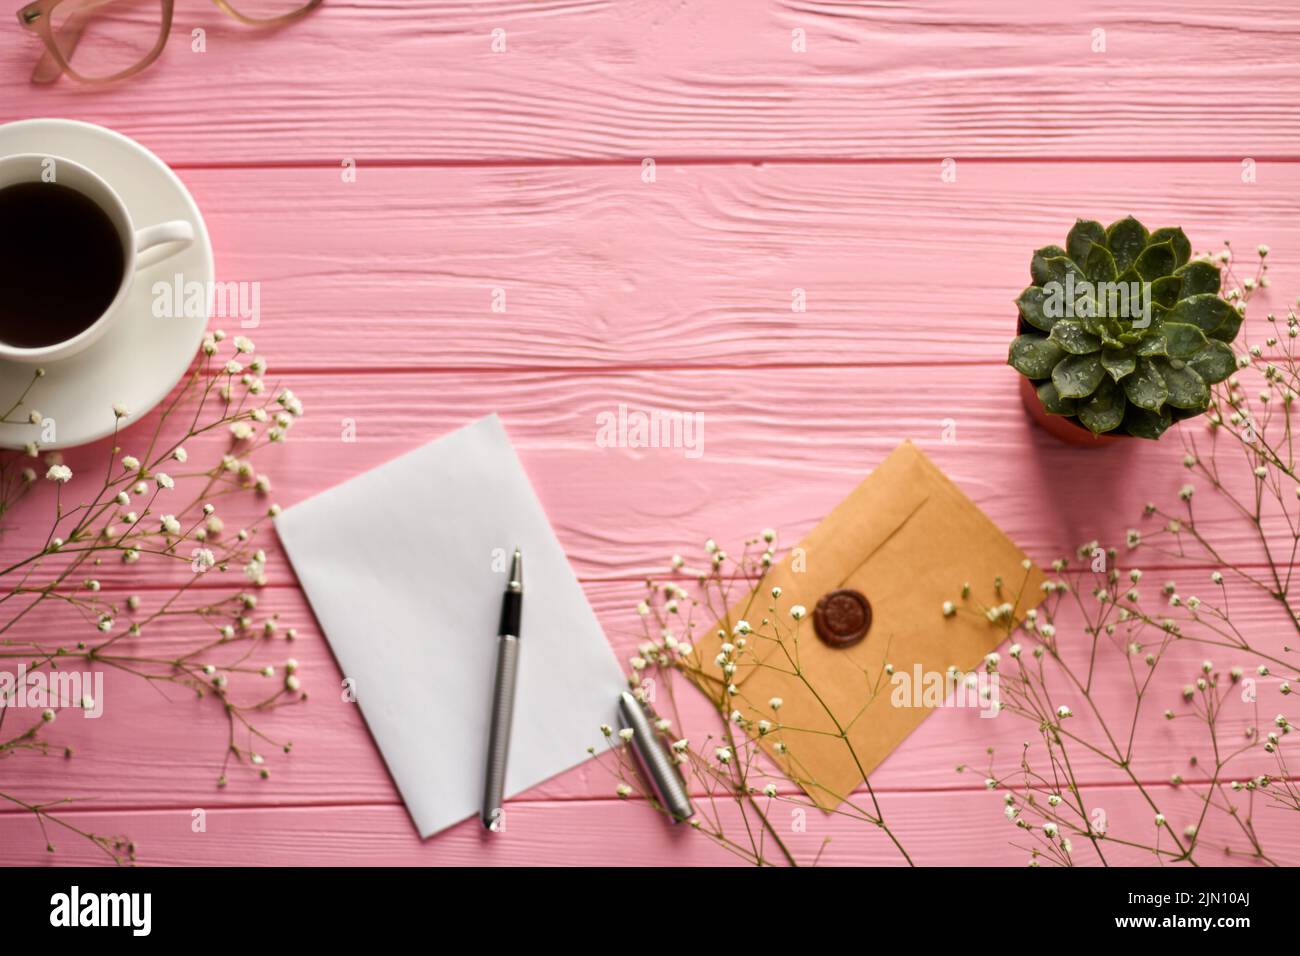 Top view workdesk accessories on pink wooden desk. Blank paper with pen and envelope. Stock Photo